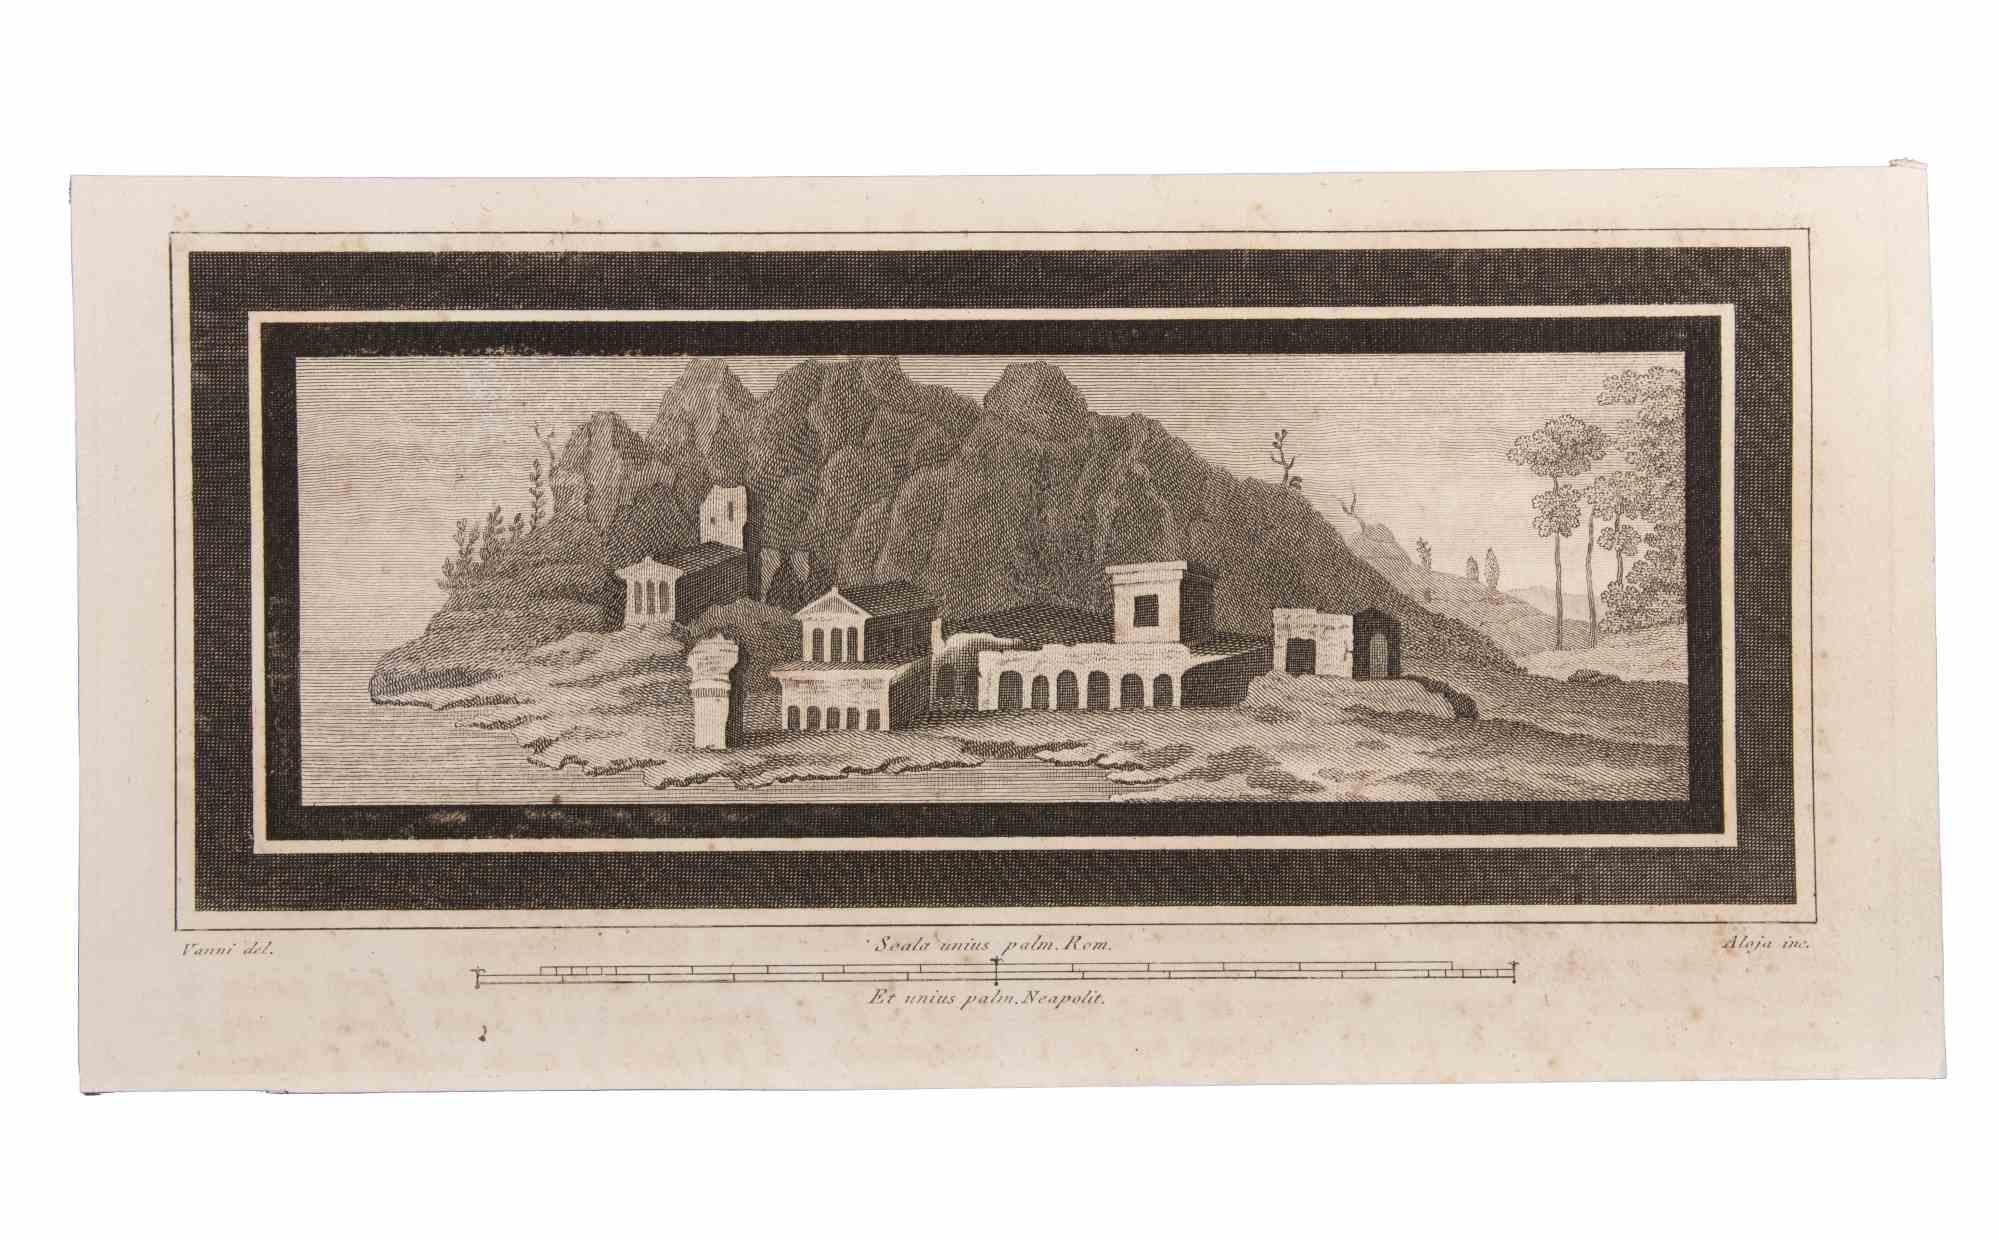 Seascapes With Monuments and Figures is an Etching realized by  Luigi Aloja (1783-1837).

The etching belongs to the print suite “Antiquities of Herculaneum Exposed” (original title: “Le Antichità di Ercolano Esposte”), an eight-volume volume of